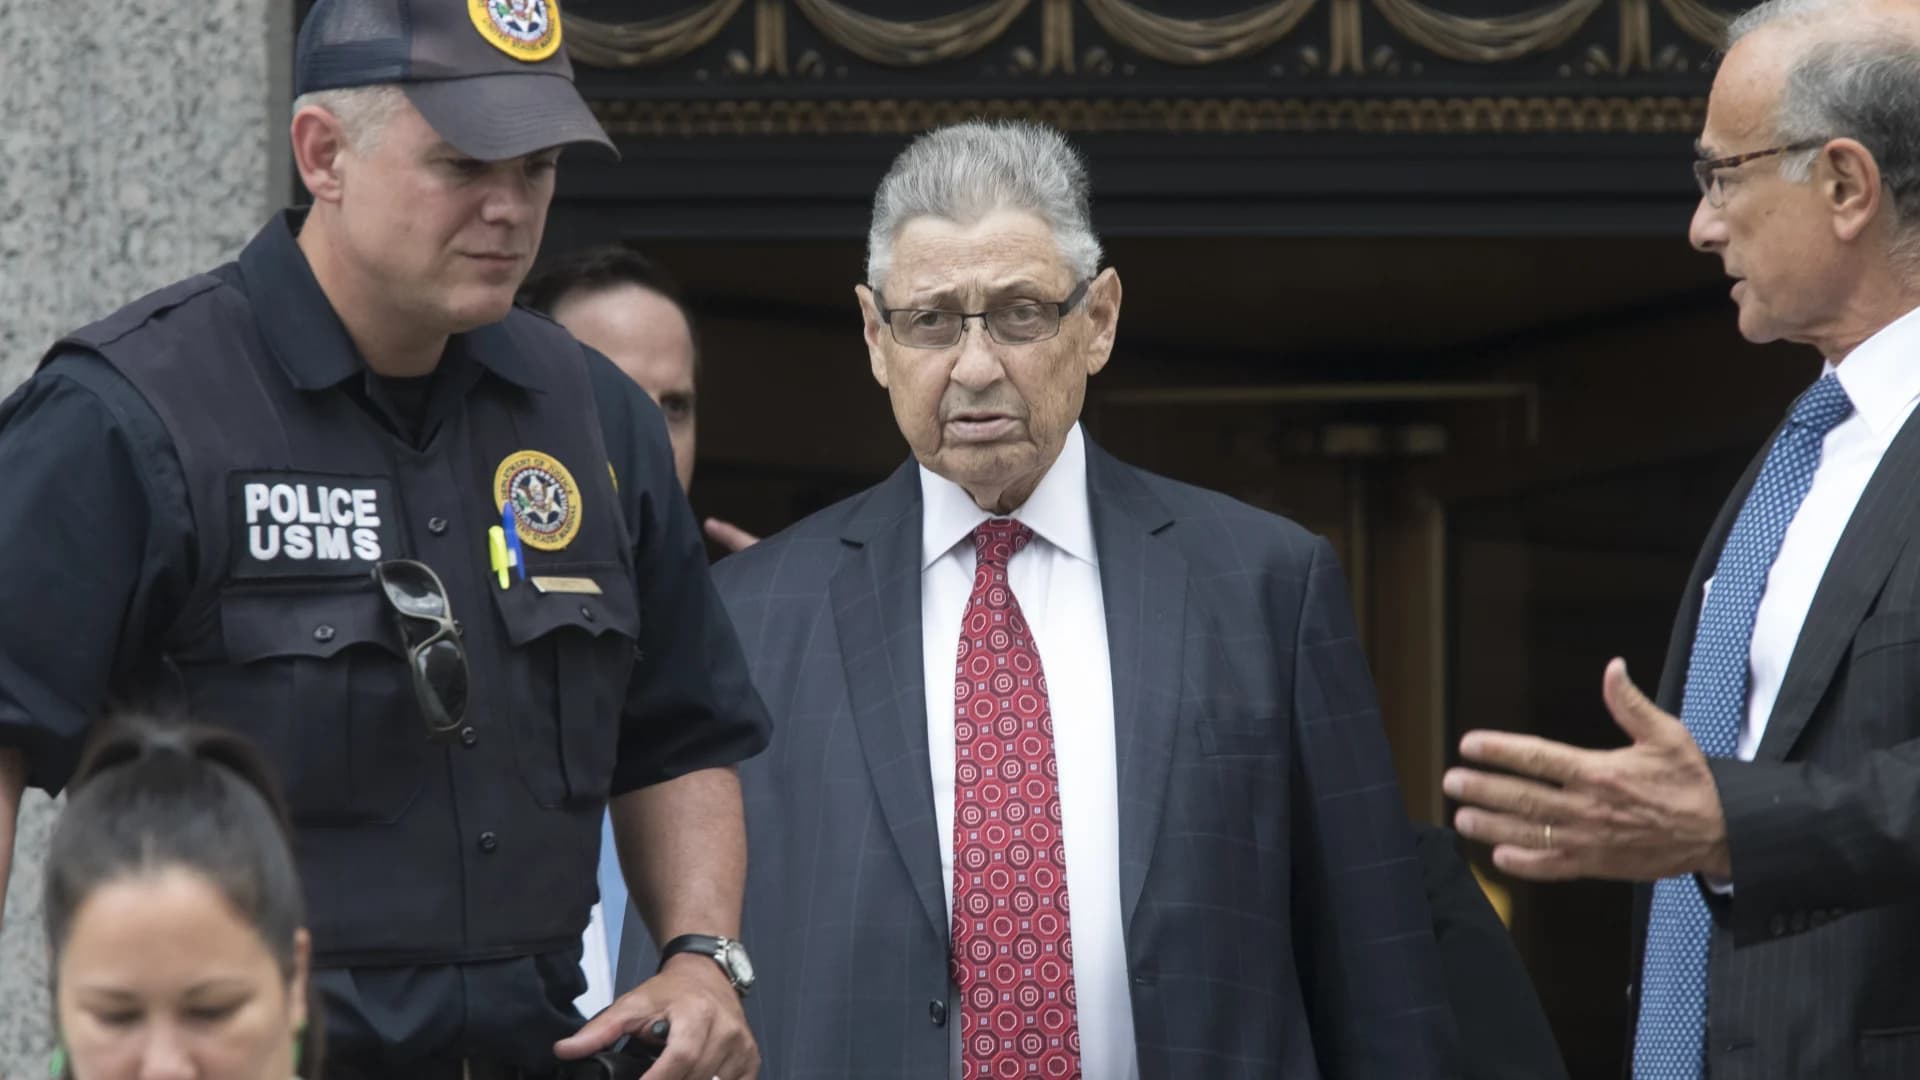 AP source: Sheldon Silver released from prison on furlough